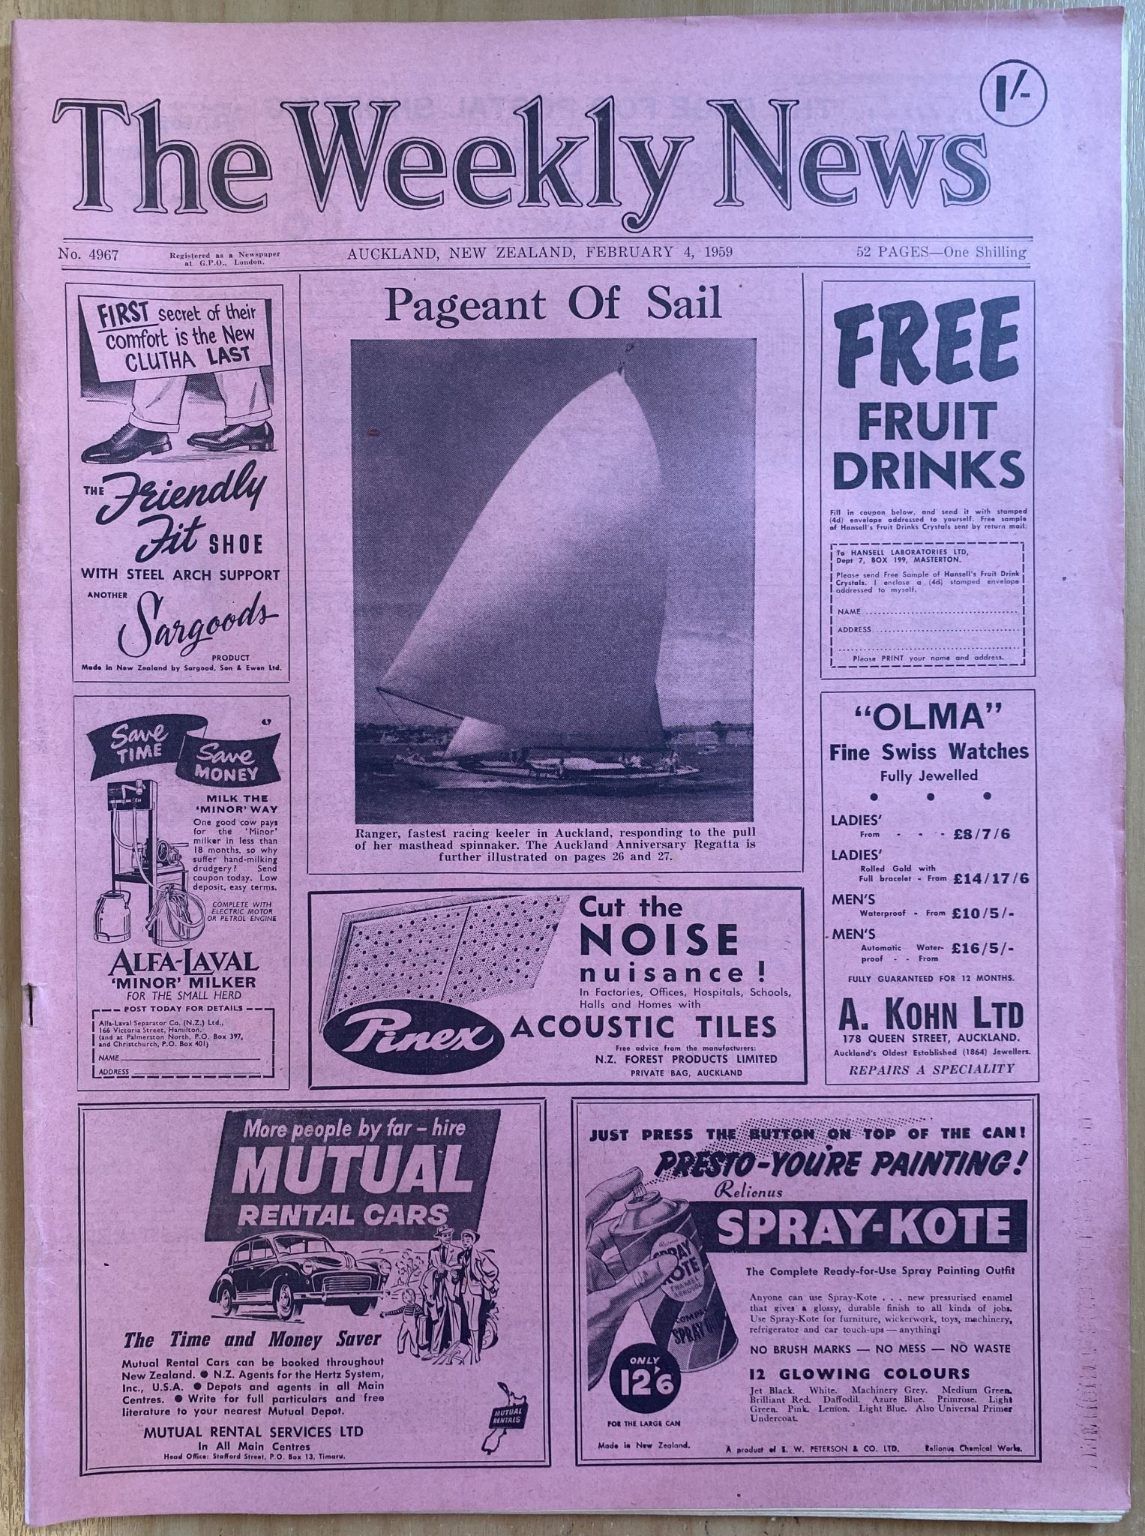 OLD NEWSPAPER: The Weekly News - No. 4967, 4 February 1959